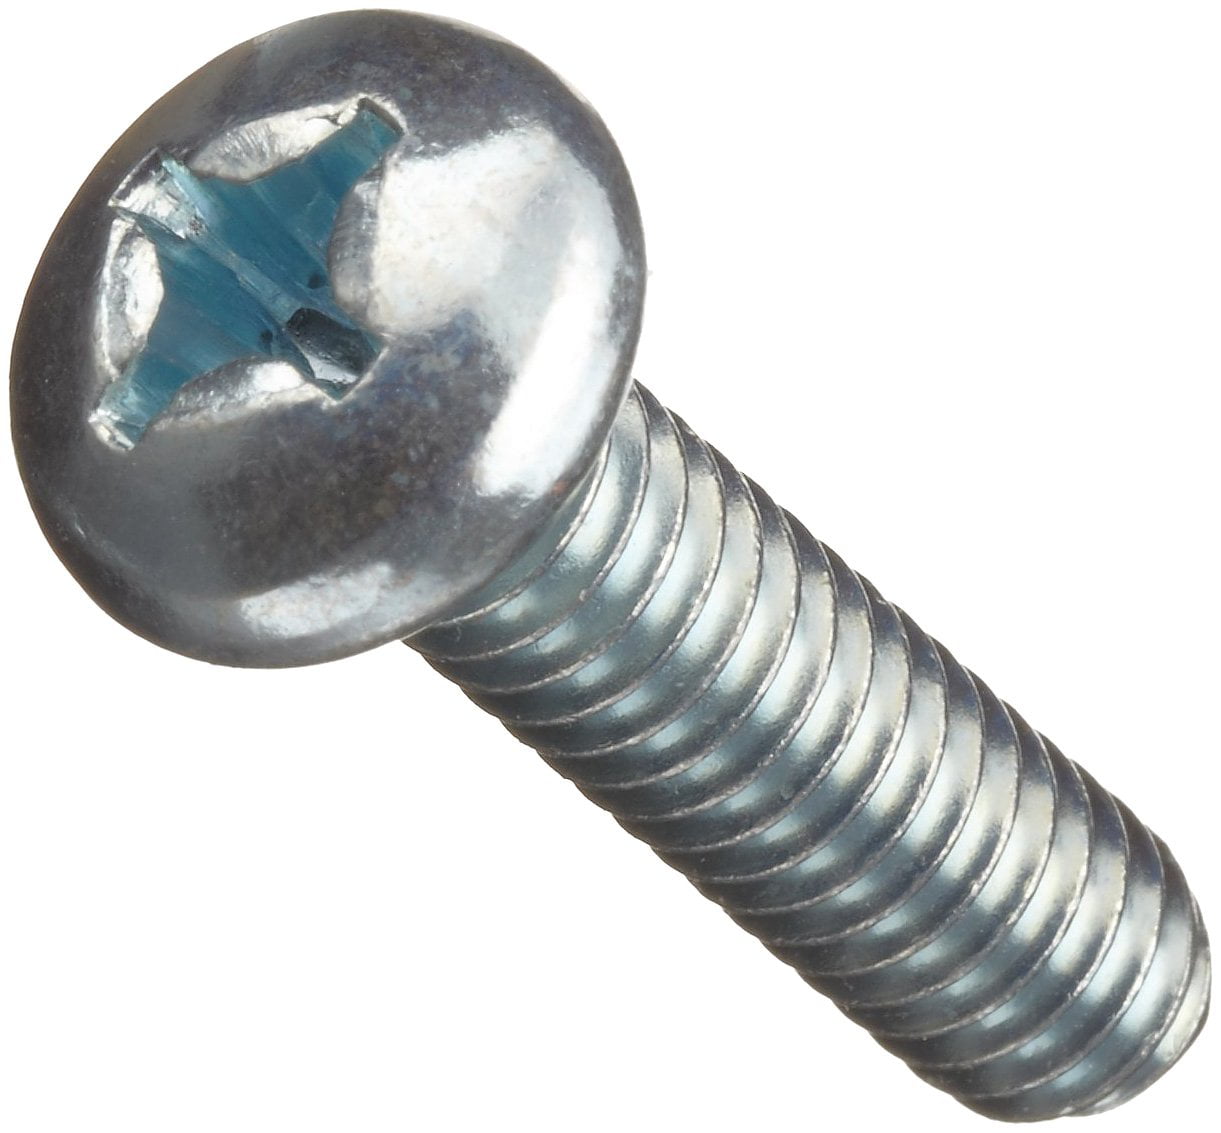 Pack of 50 Steel Machine Screw Phillips Drive M6-1 Threads Small Parts 50mm Length Zinc Plated Finish Flat Head 